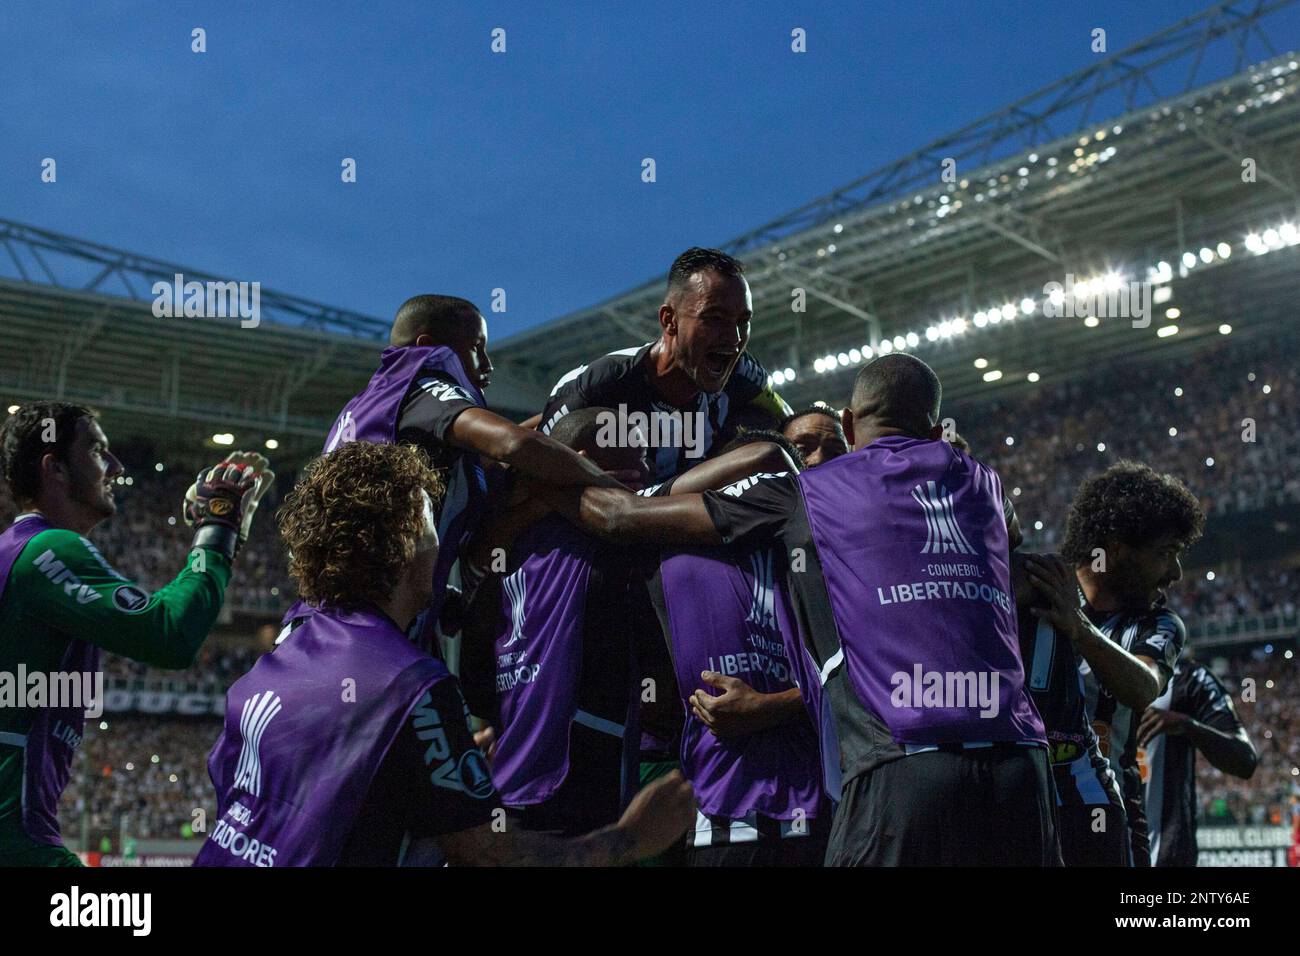 MG - Belo Horizonte - 12/02/2019 - Libertadores 2019, Atletico x Danubio - player Ricardo Oliveira of Atletico-MG celebrates his goal with players of his team during a match against the Danube at Independencia Stadium for the championship Libertadores 2019. Foto: Pedro Vale / AGIF (via AP) Stock Photo